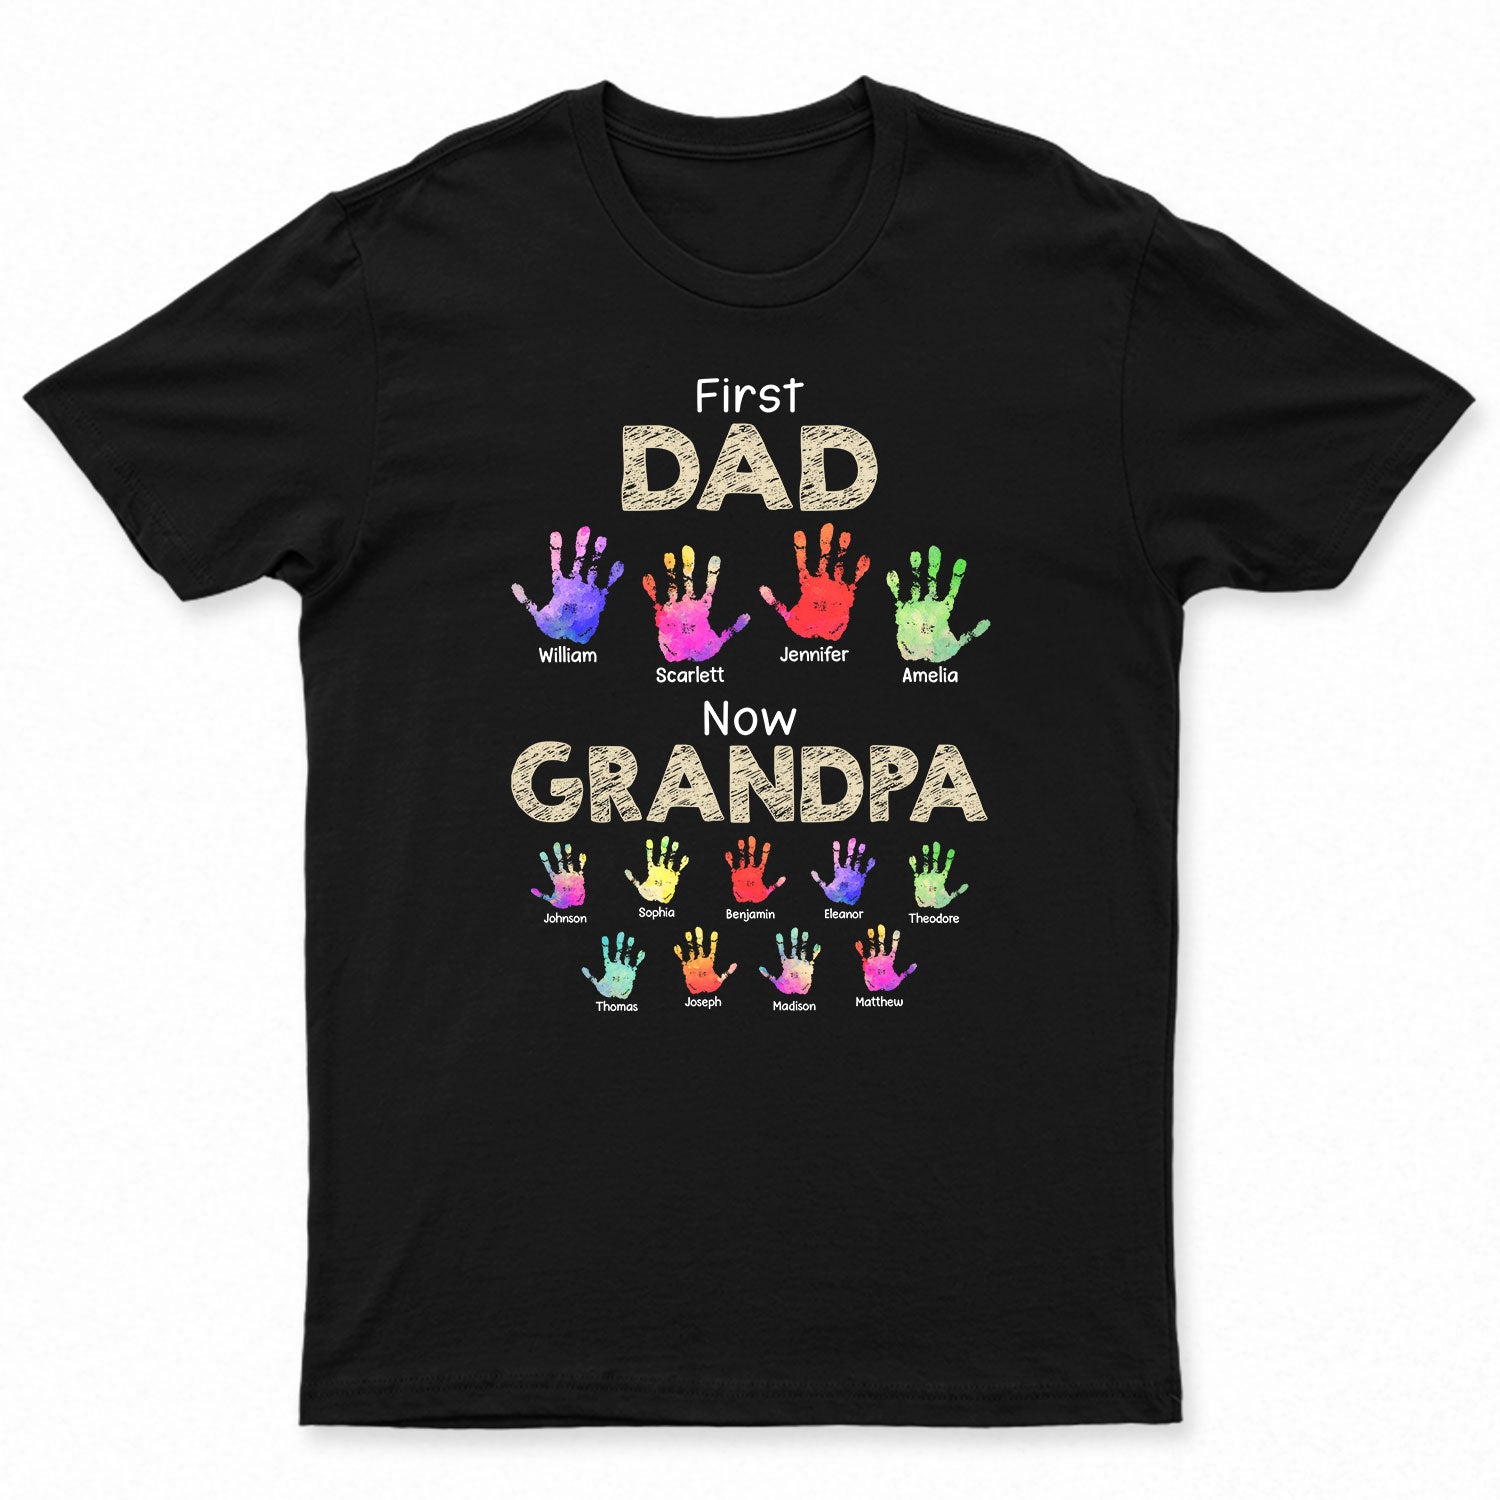 First Dad Now Grandpa Handprints - Gift For Father, Grandfather - Personalized T Shirt